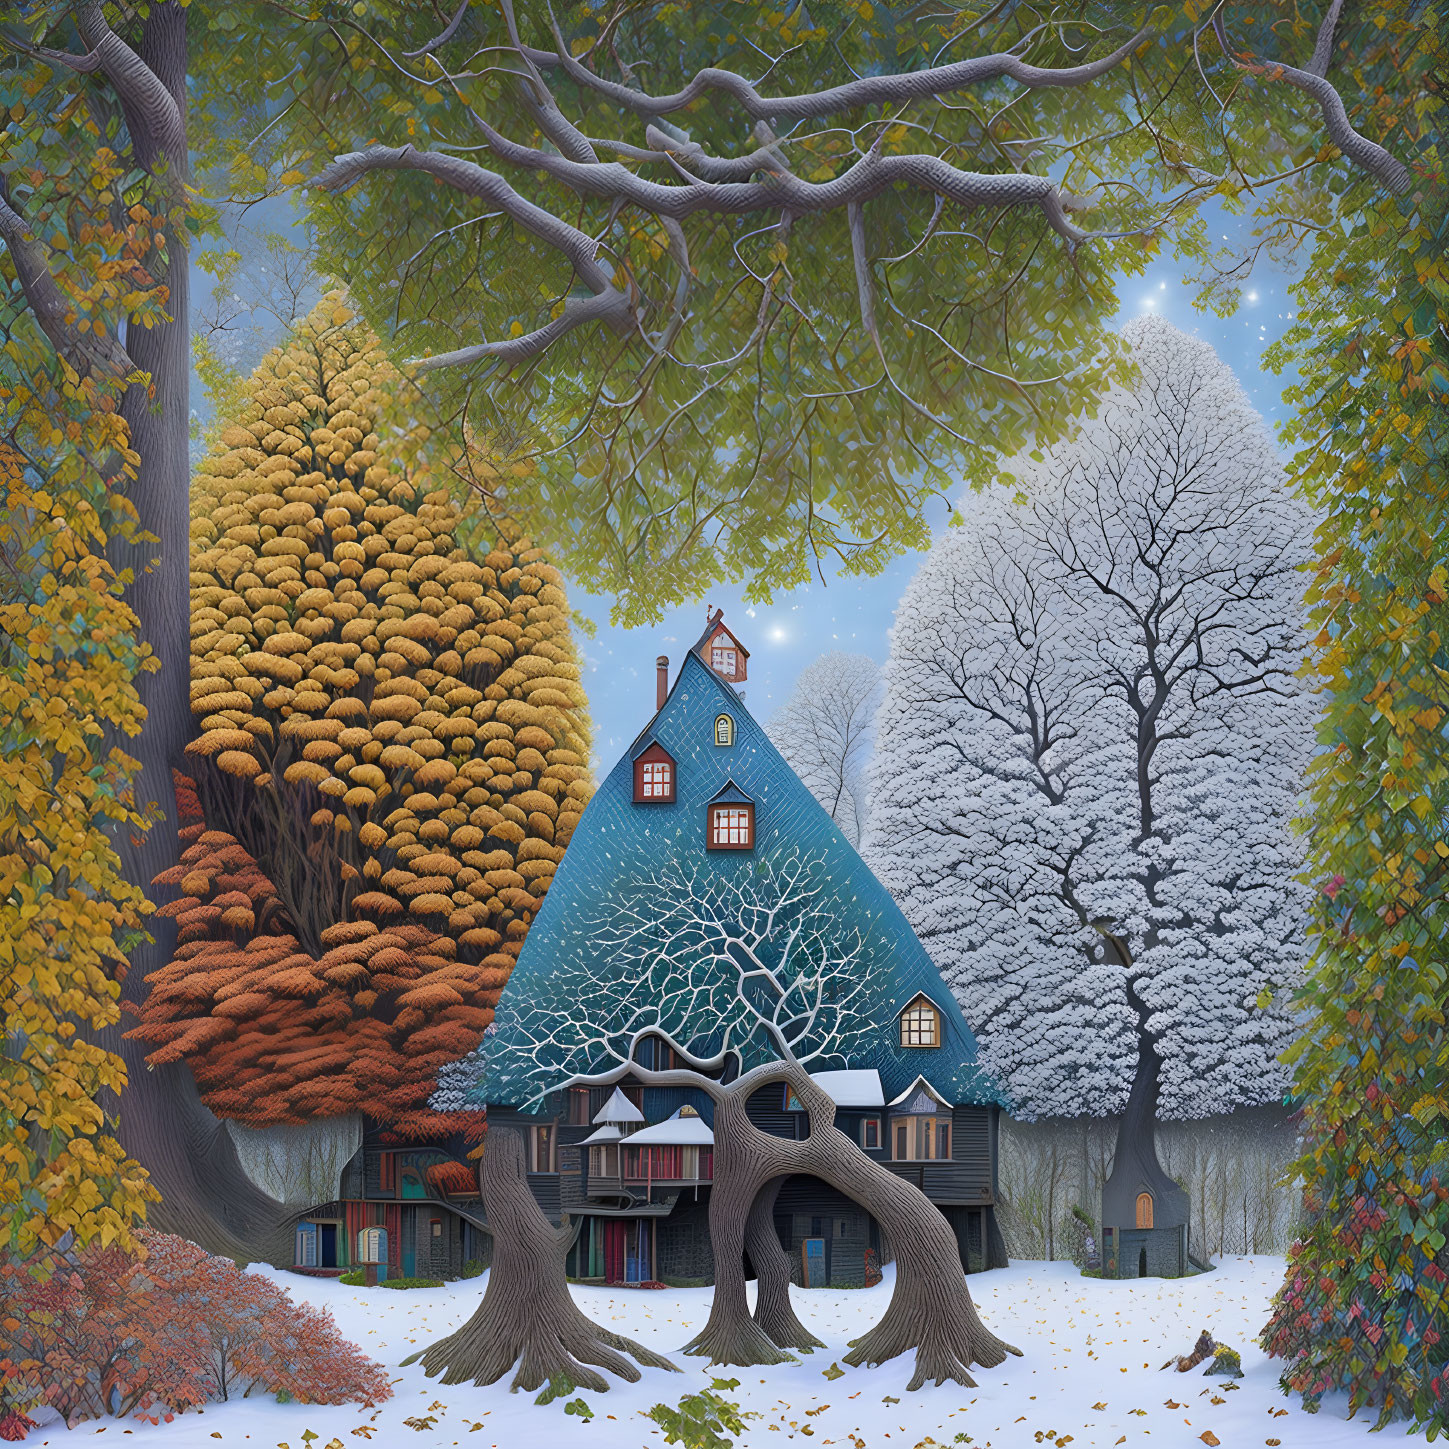 Illustration of seasonal forest scene with cozy house